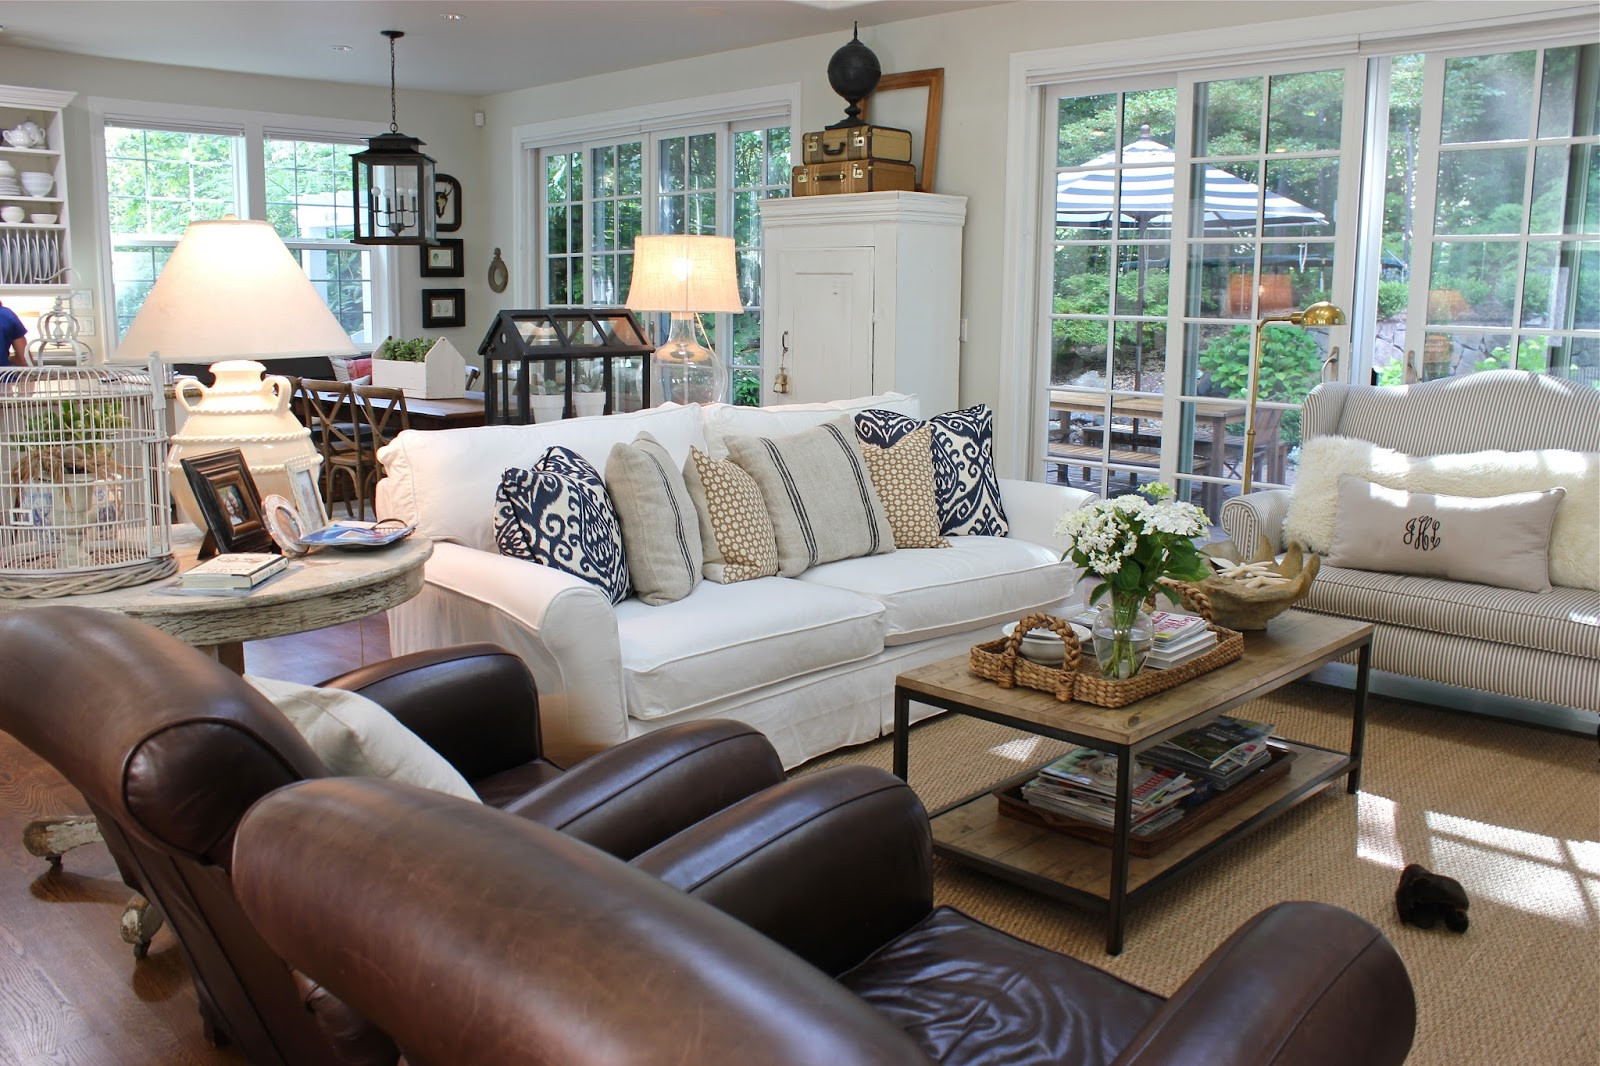 Comfy Living Room Ideas
 The Design Anatomy of the Family Room